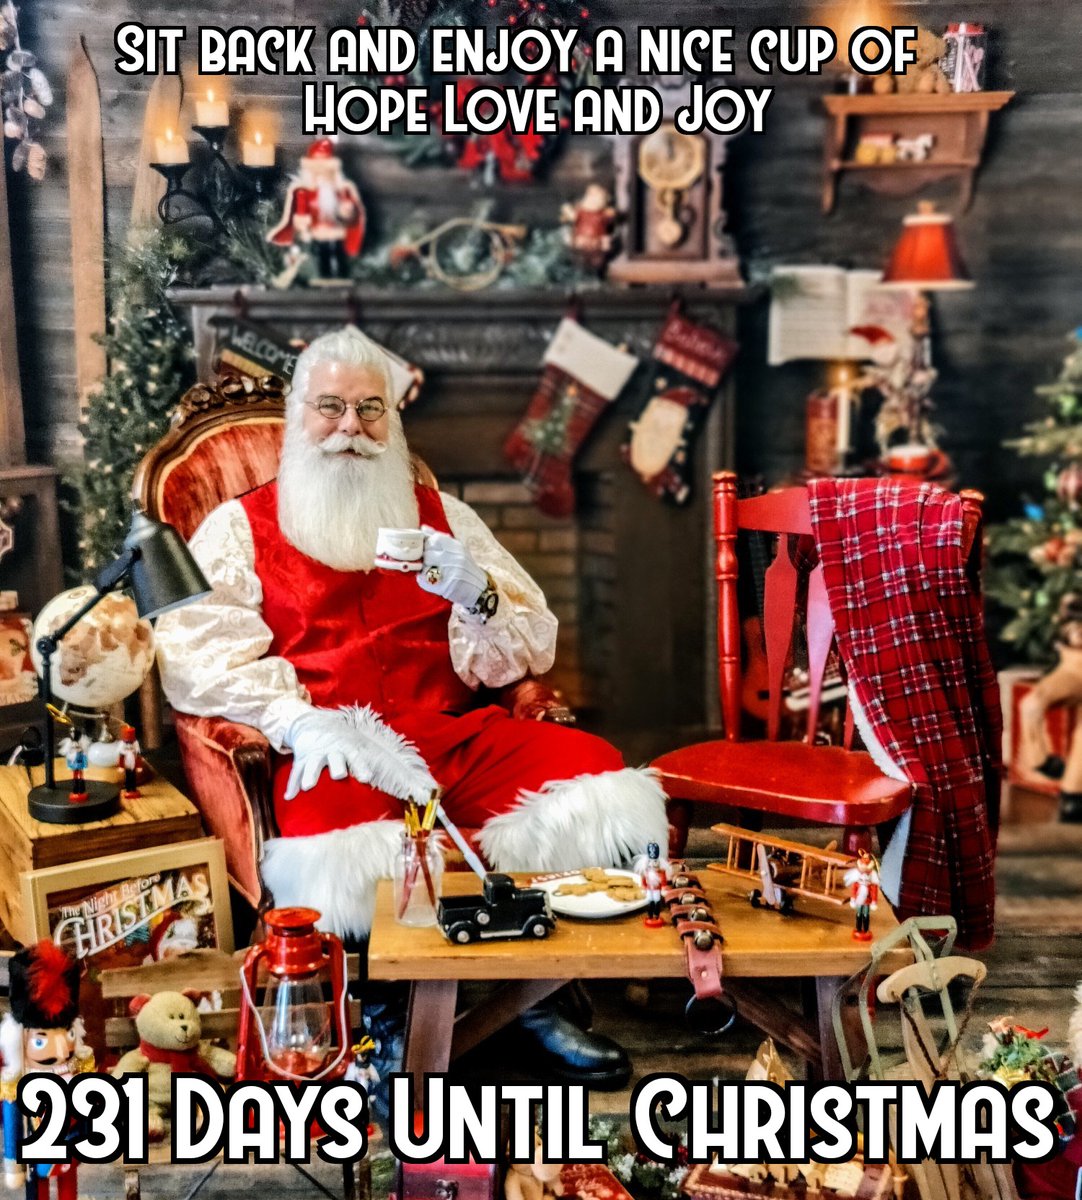 Happy Wednesday Everyone! Relax! Sit back and enjoy a nice cup of Hope, Love and Joy. Have a blessed day and be a blessing.

#christmascountdown #christmas #countdowntochristmas #HopeLoveJoy #blessing #blessed #wednesday #believe #share #eastcoastsanta